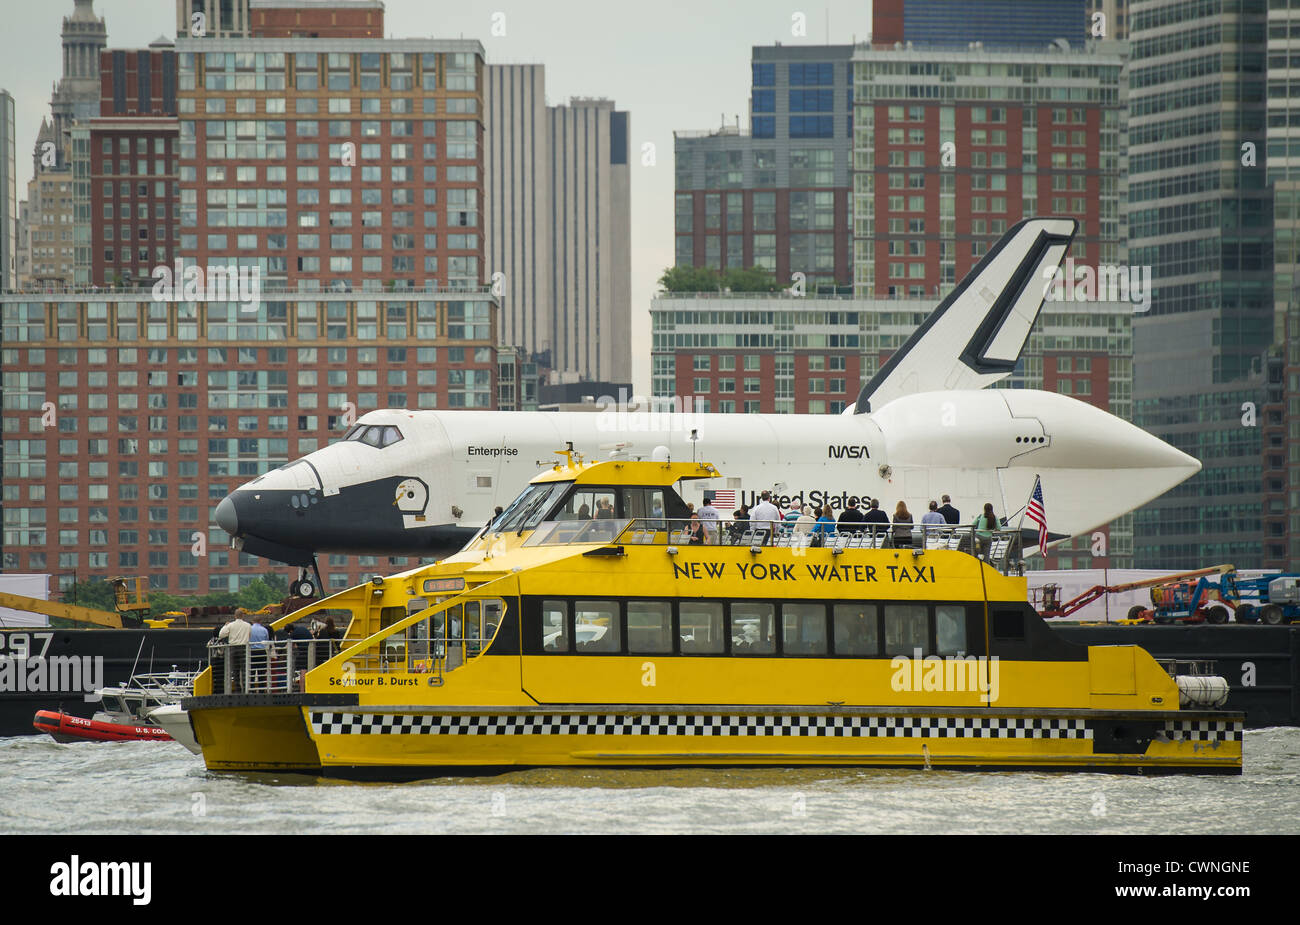 New York Water Taxi gets a close-up view of the space shuttle Enterprise as it is towed by barge up the Hudson River June 6, 2012 on it's way to the Intrepid Air and Space Museum where it will be permanently displayed, Stock Photo